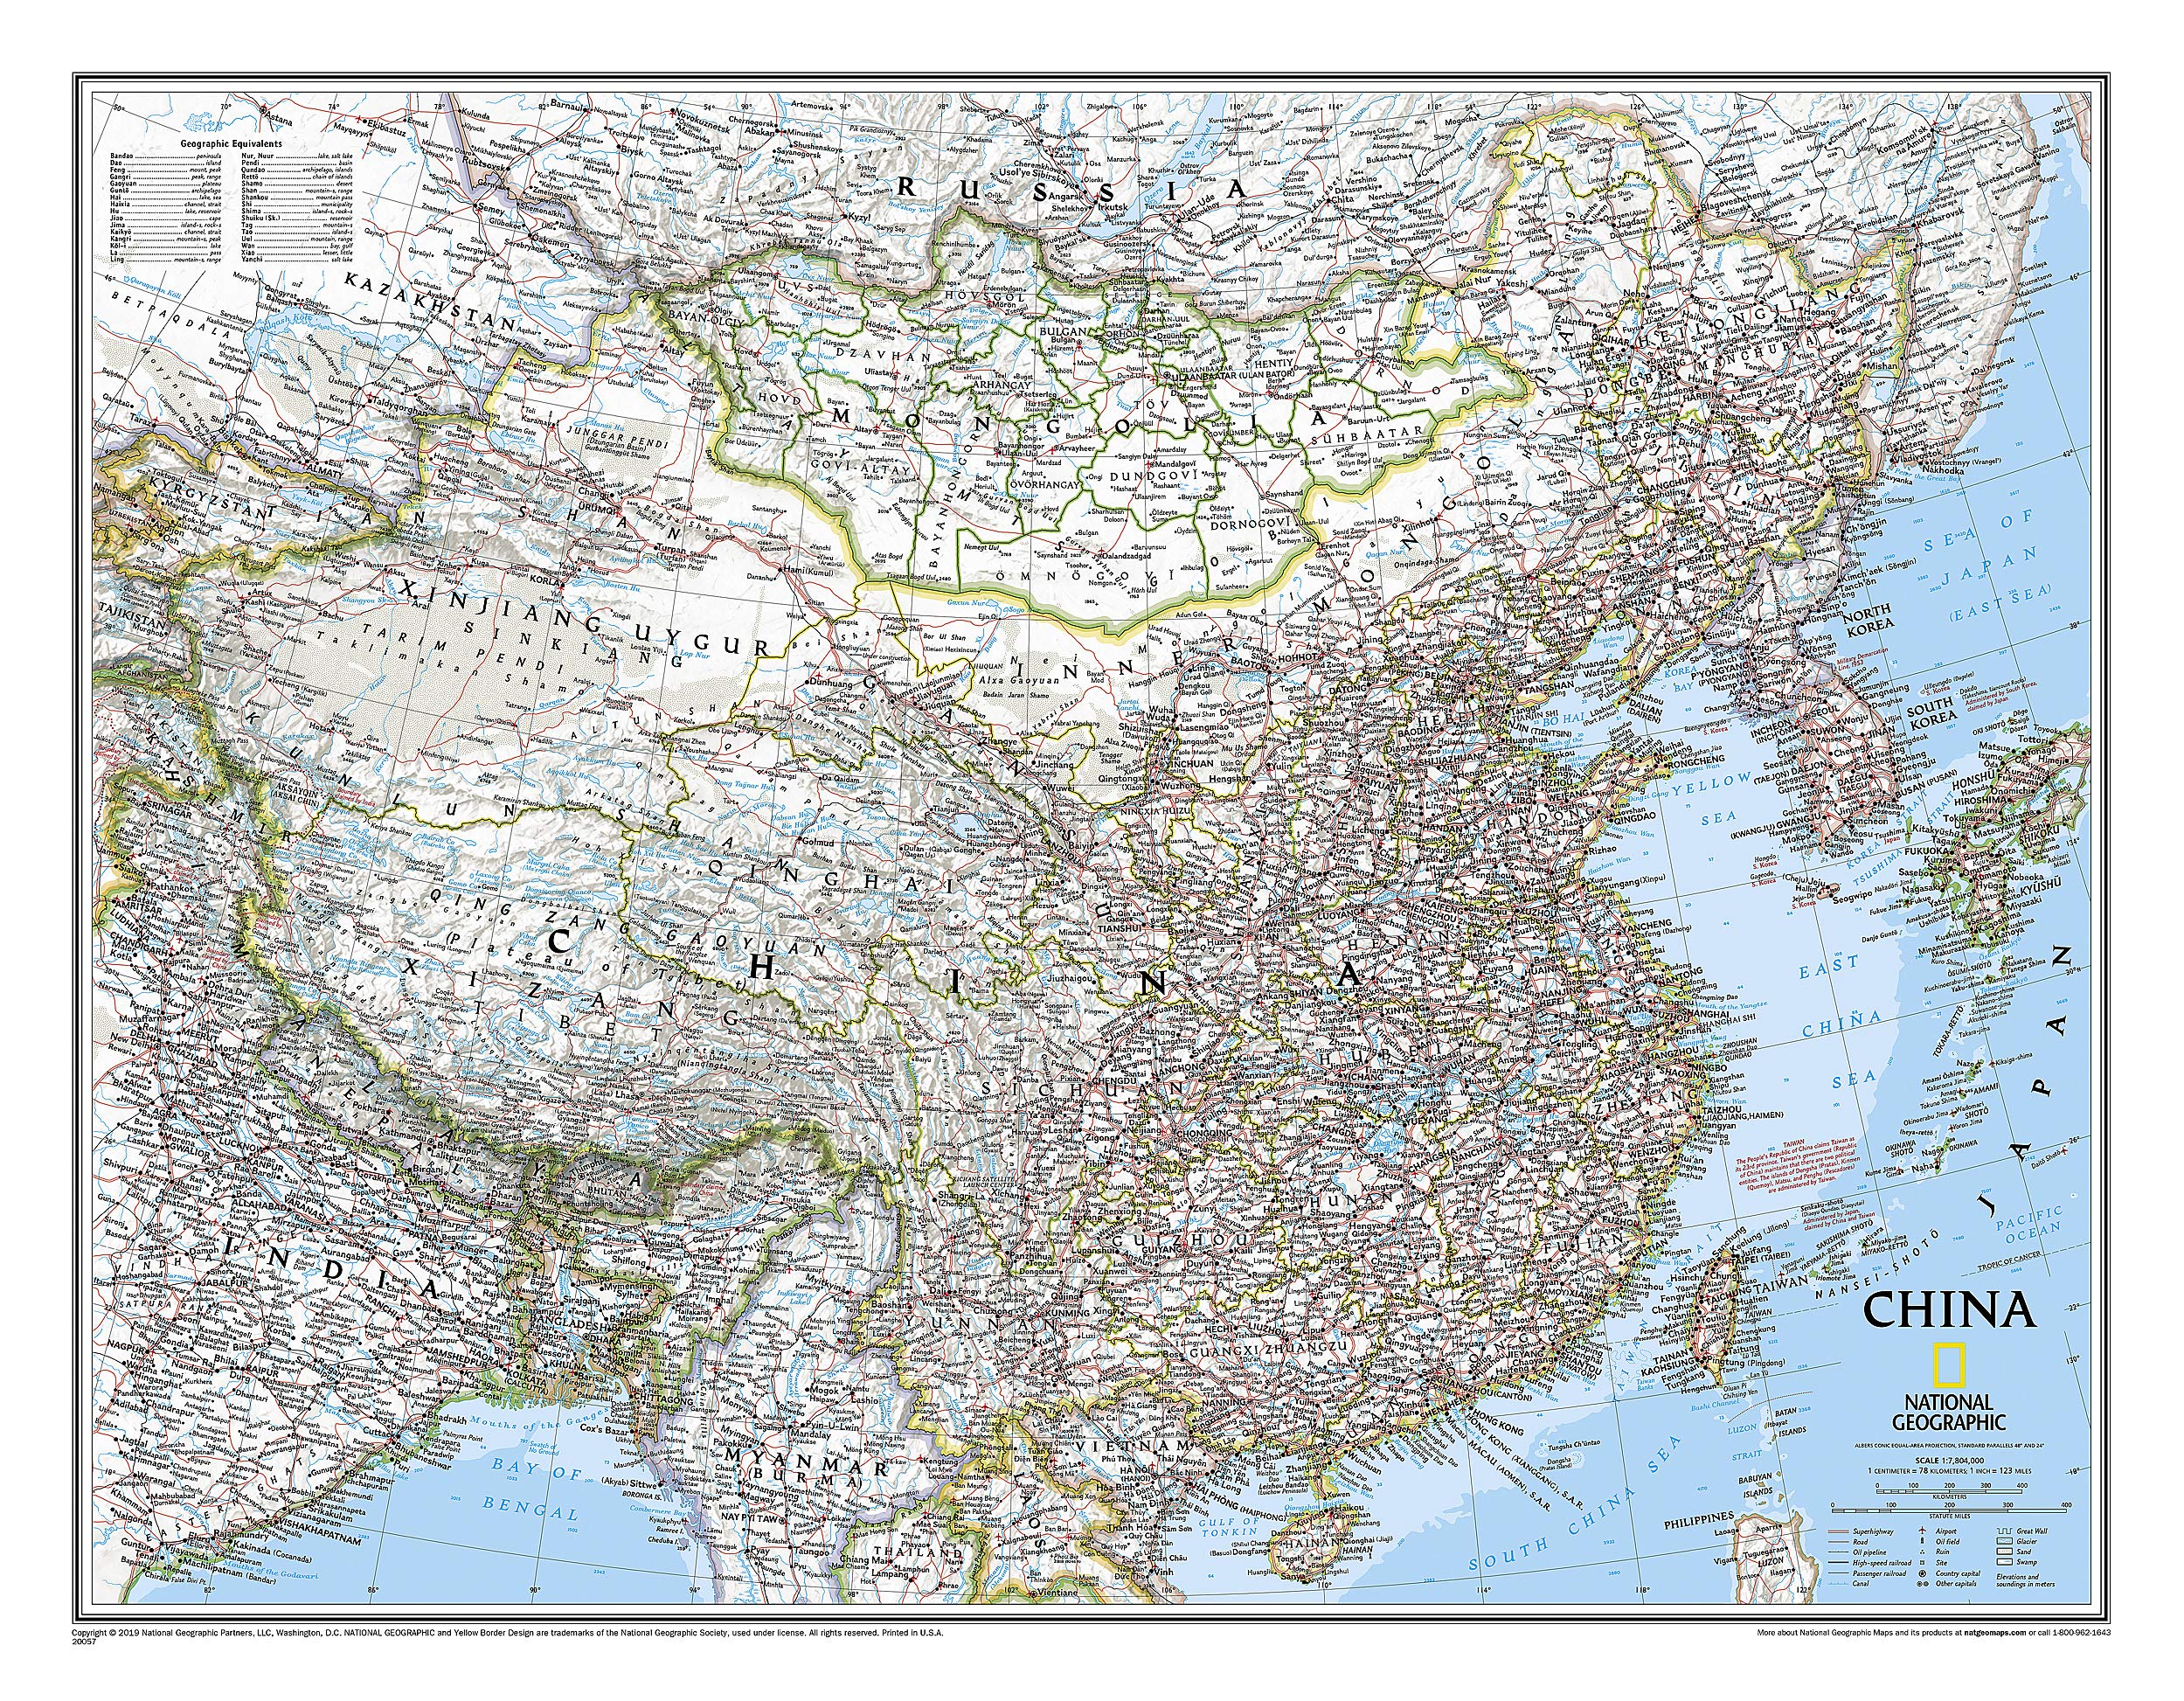 National Geographic: China Classic Wall Map (30.25 x 23.5 inches) (National Geographic Reference Map): National Geographic Maps: 9780792249610: Books